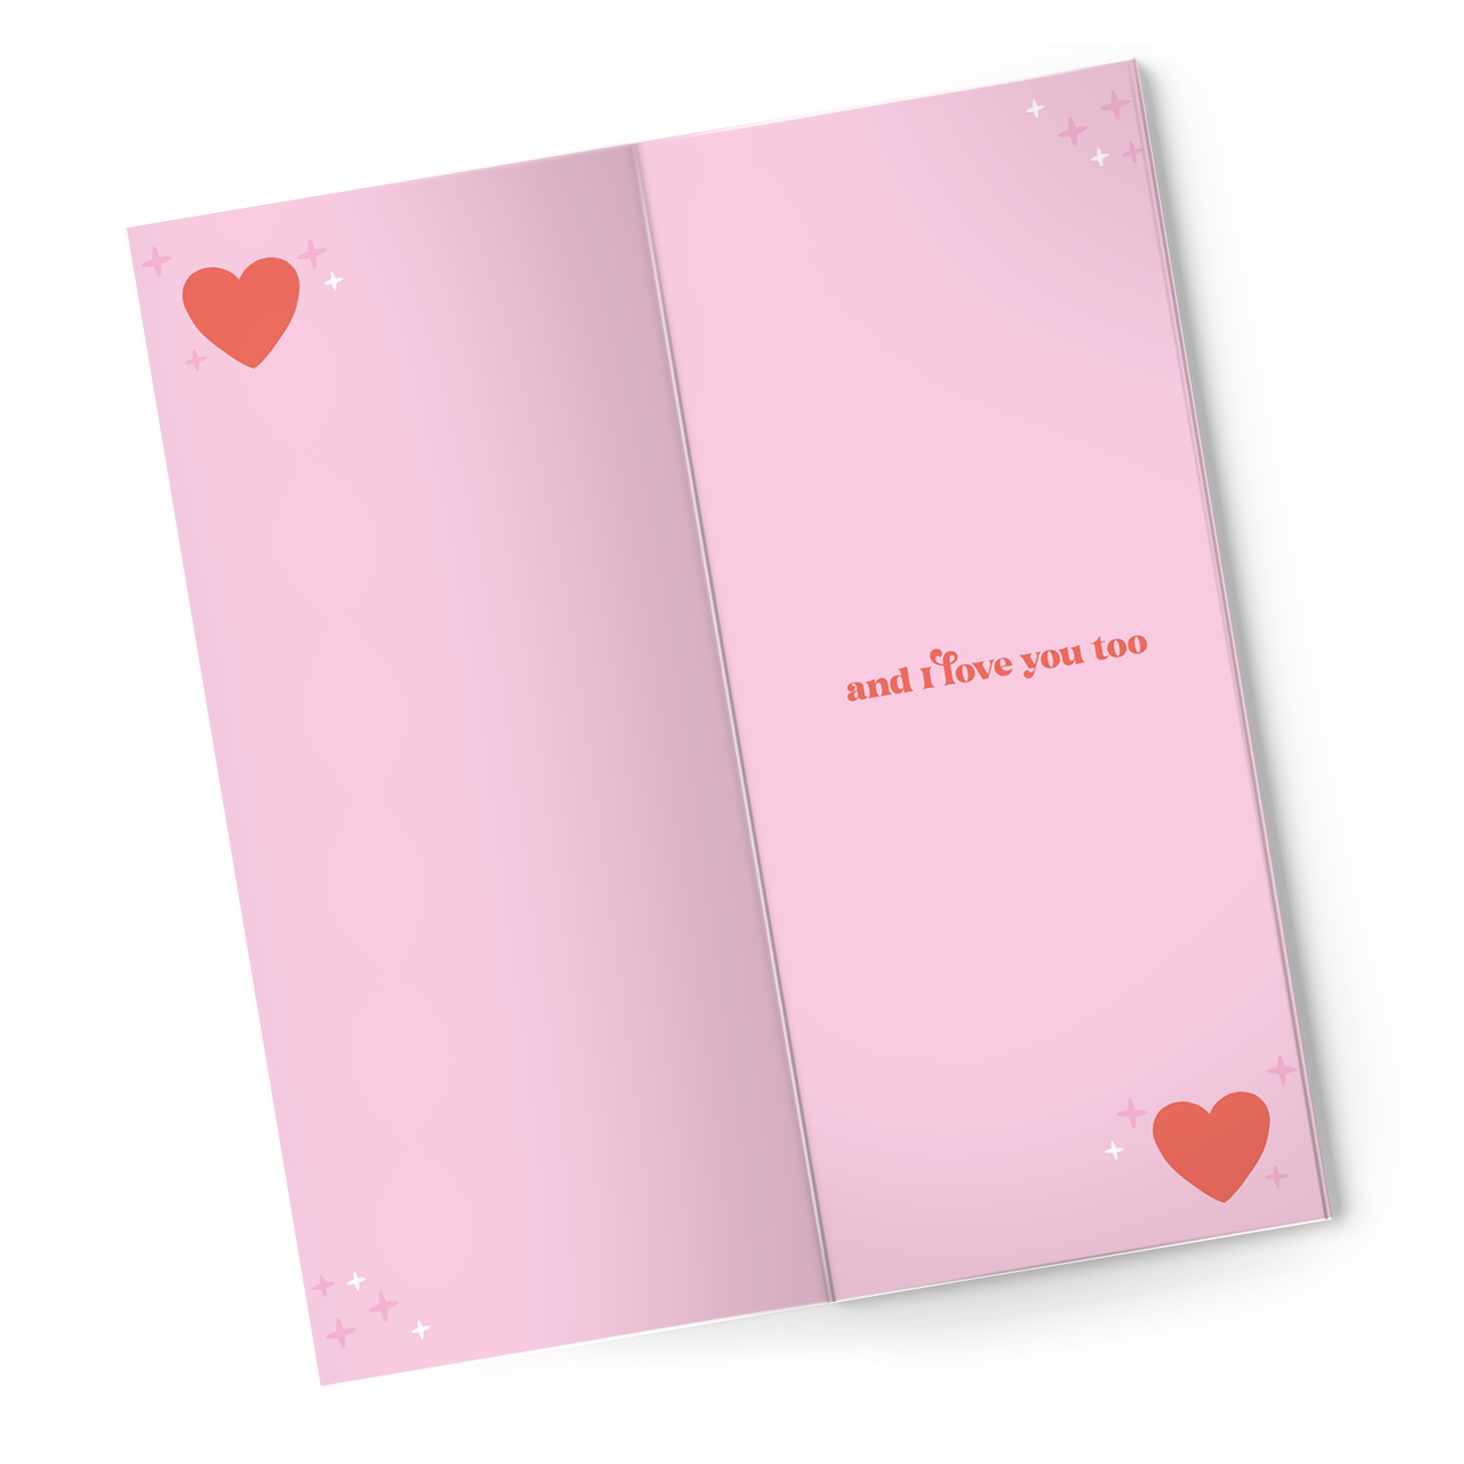 Chocolate Greeting Card: How Sweet It Is to Be Loved By You